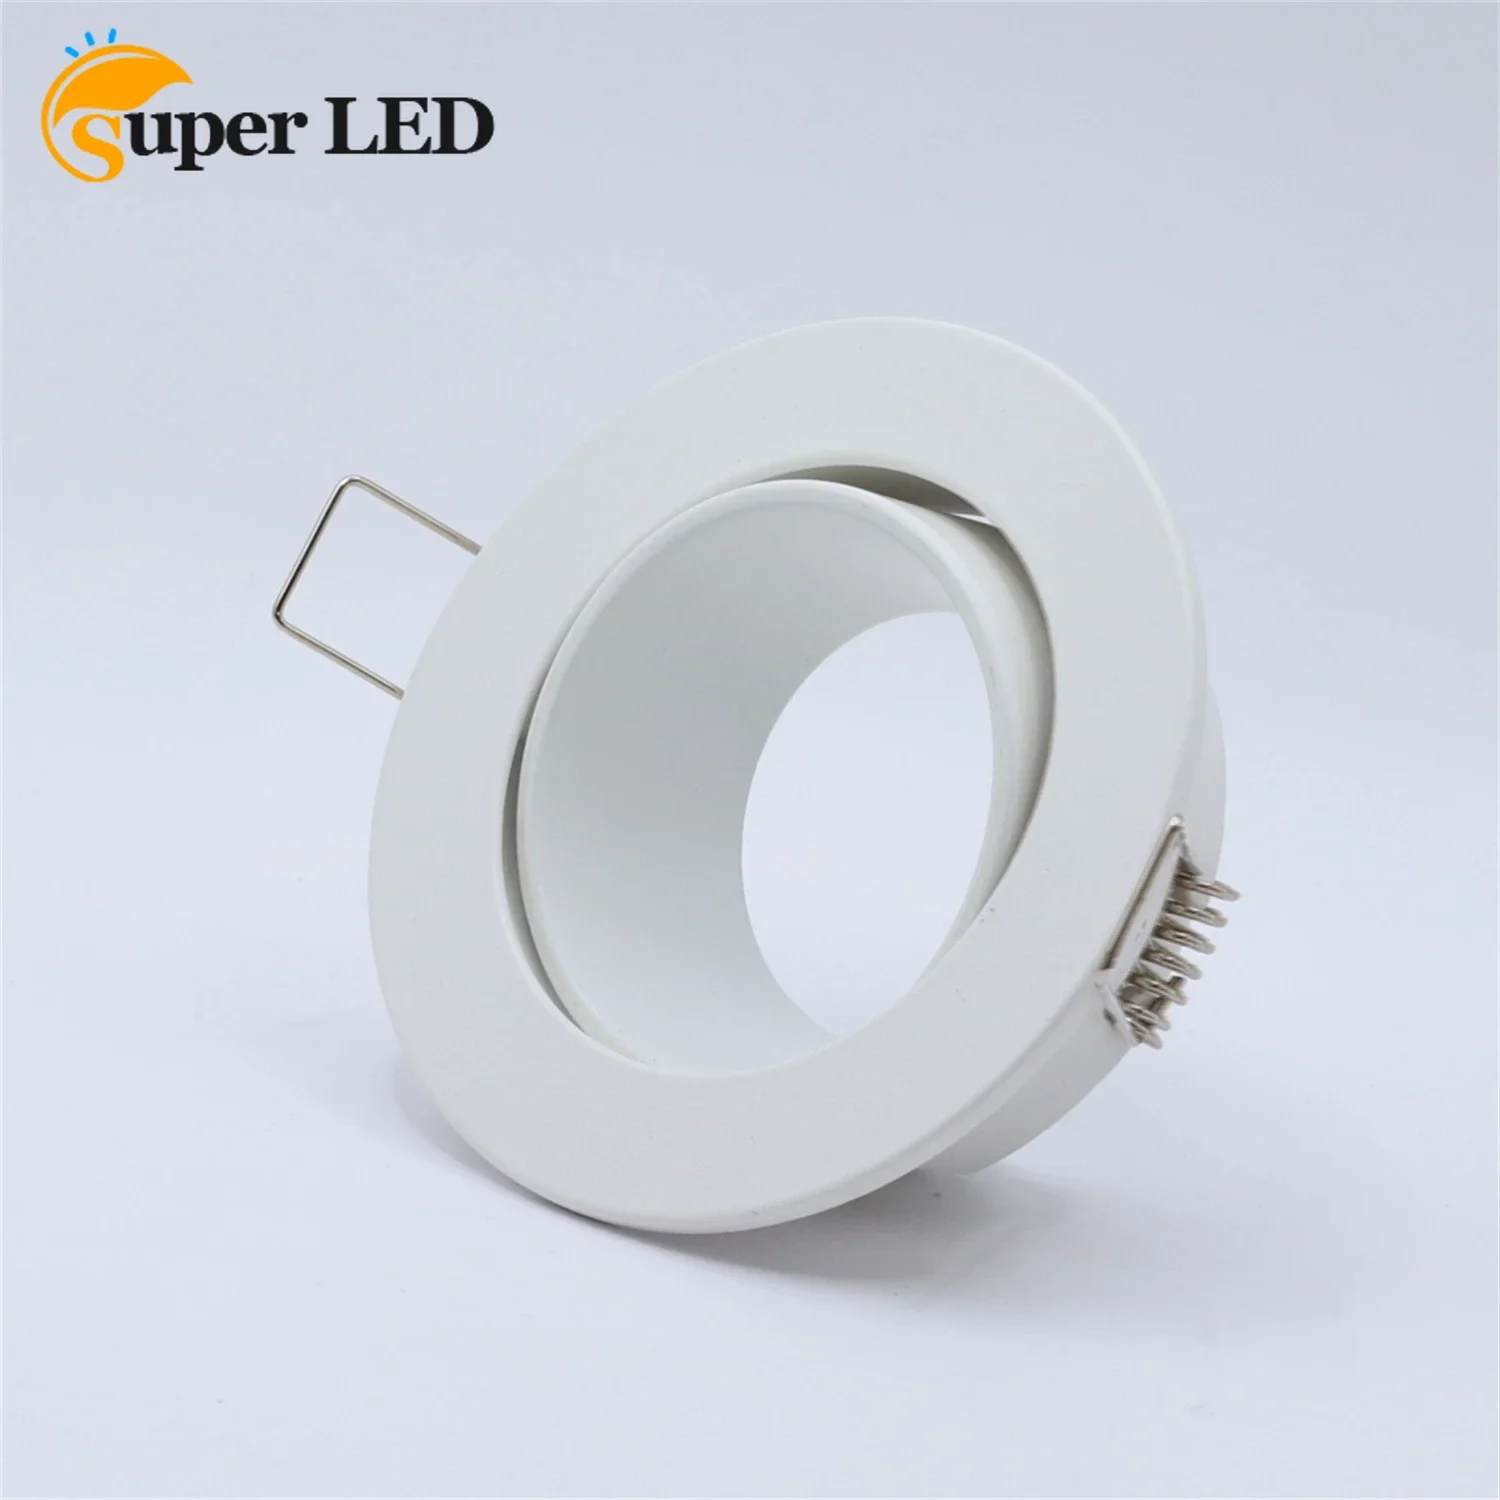 

Indoor Led Downlight Round Recessed Ceiling Spot Lamp Frame Gu10 Cut Hole 70mm SpotLight Fitting Fixture